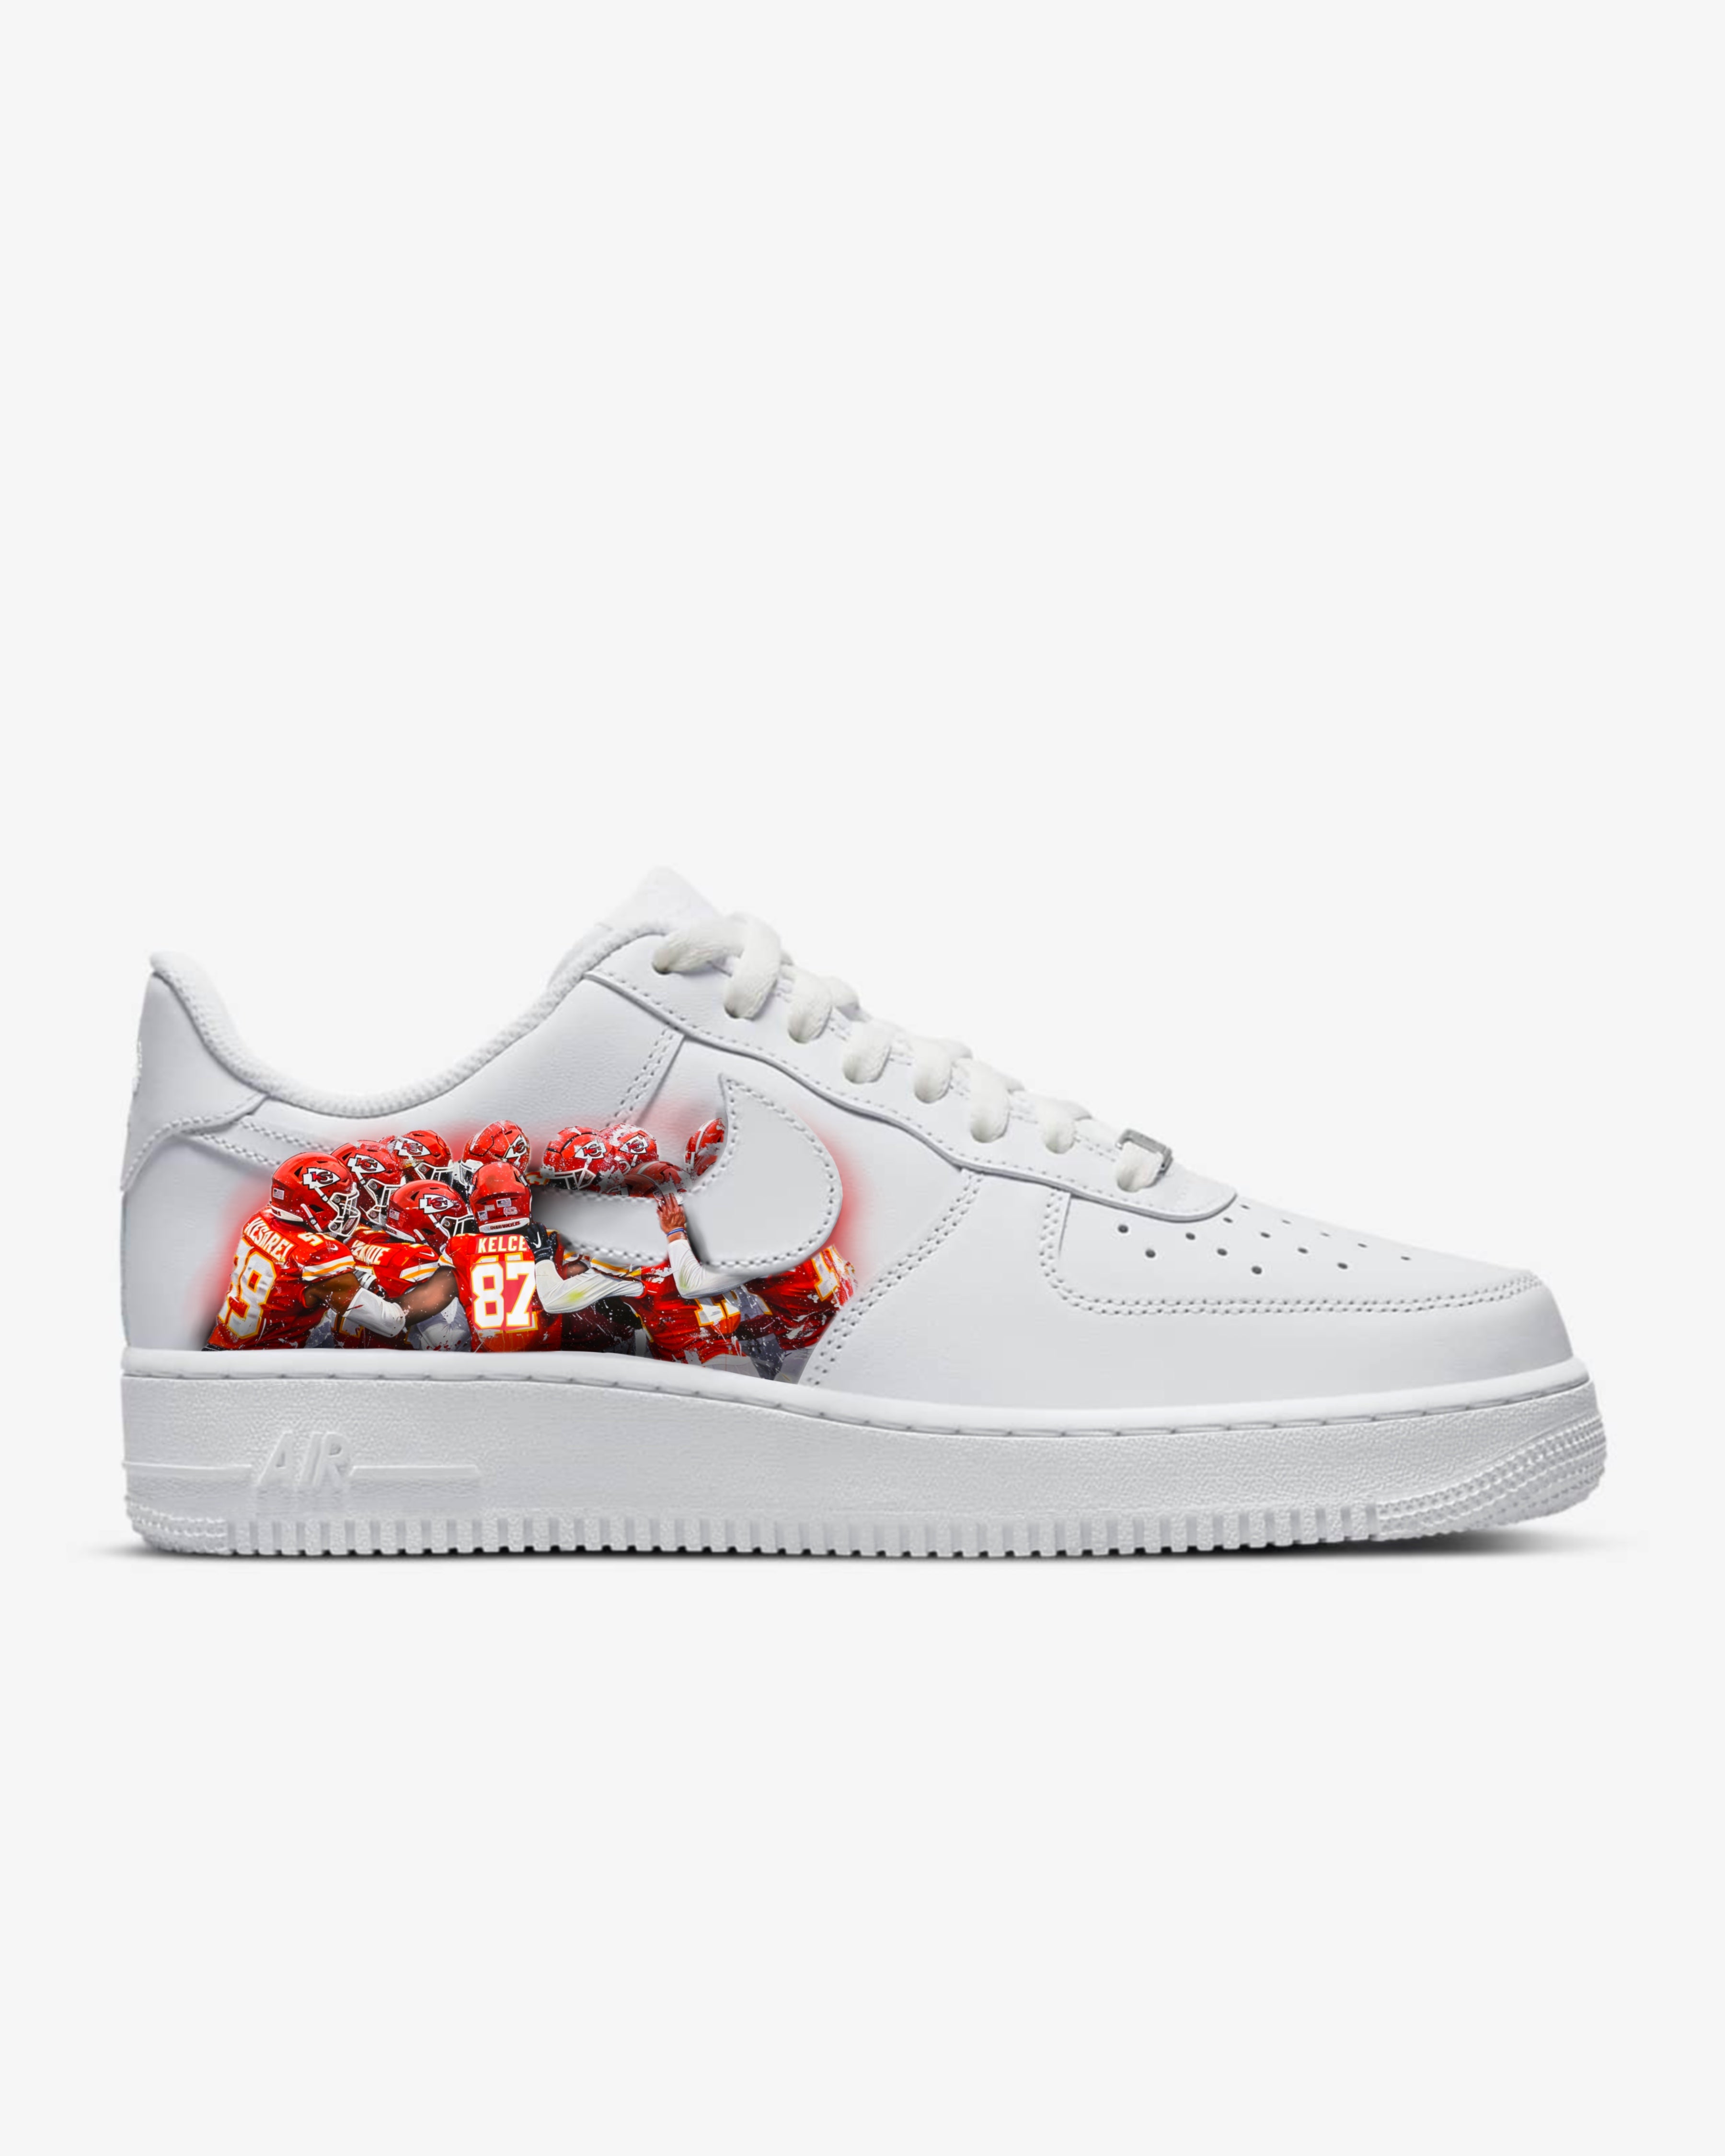 Championship Chiefs: Limited Edition AF1 – Androo's Art